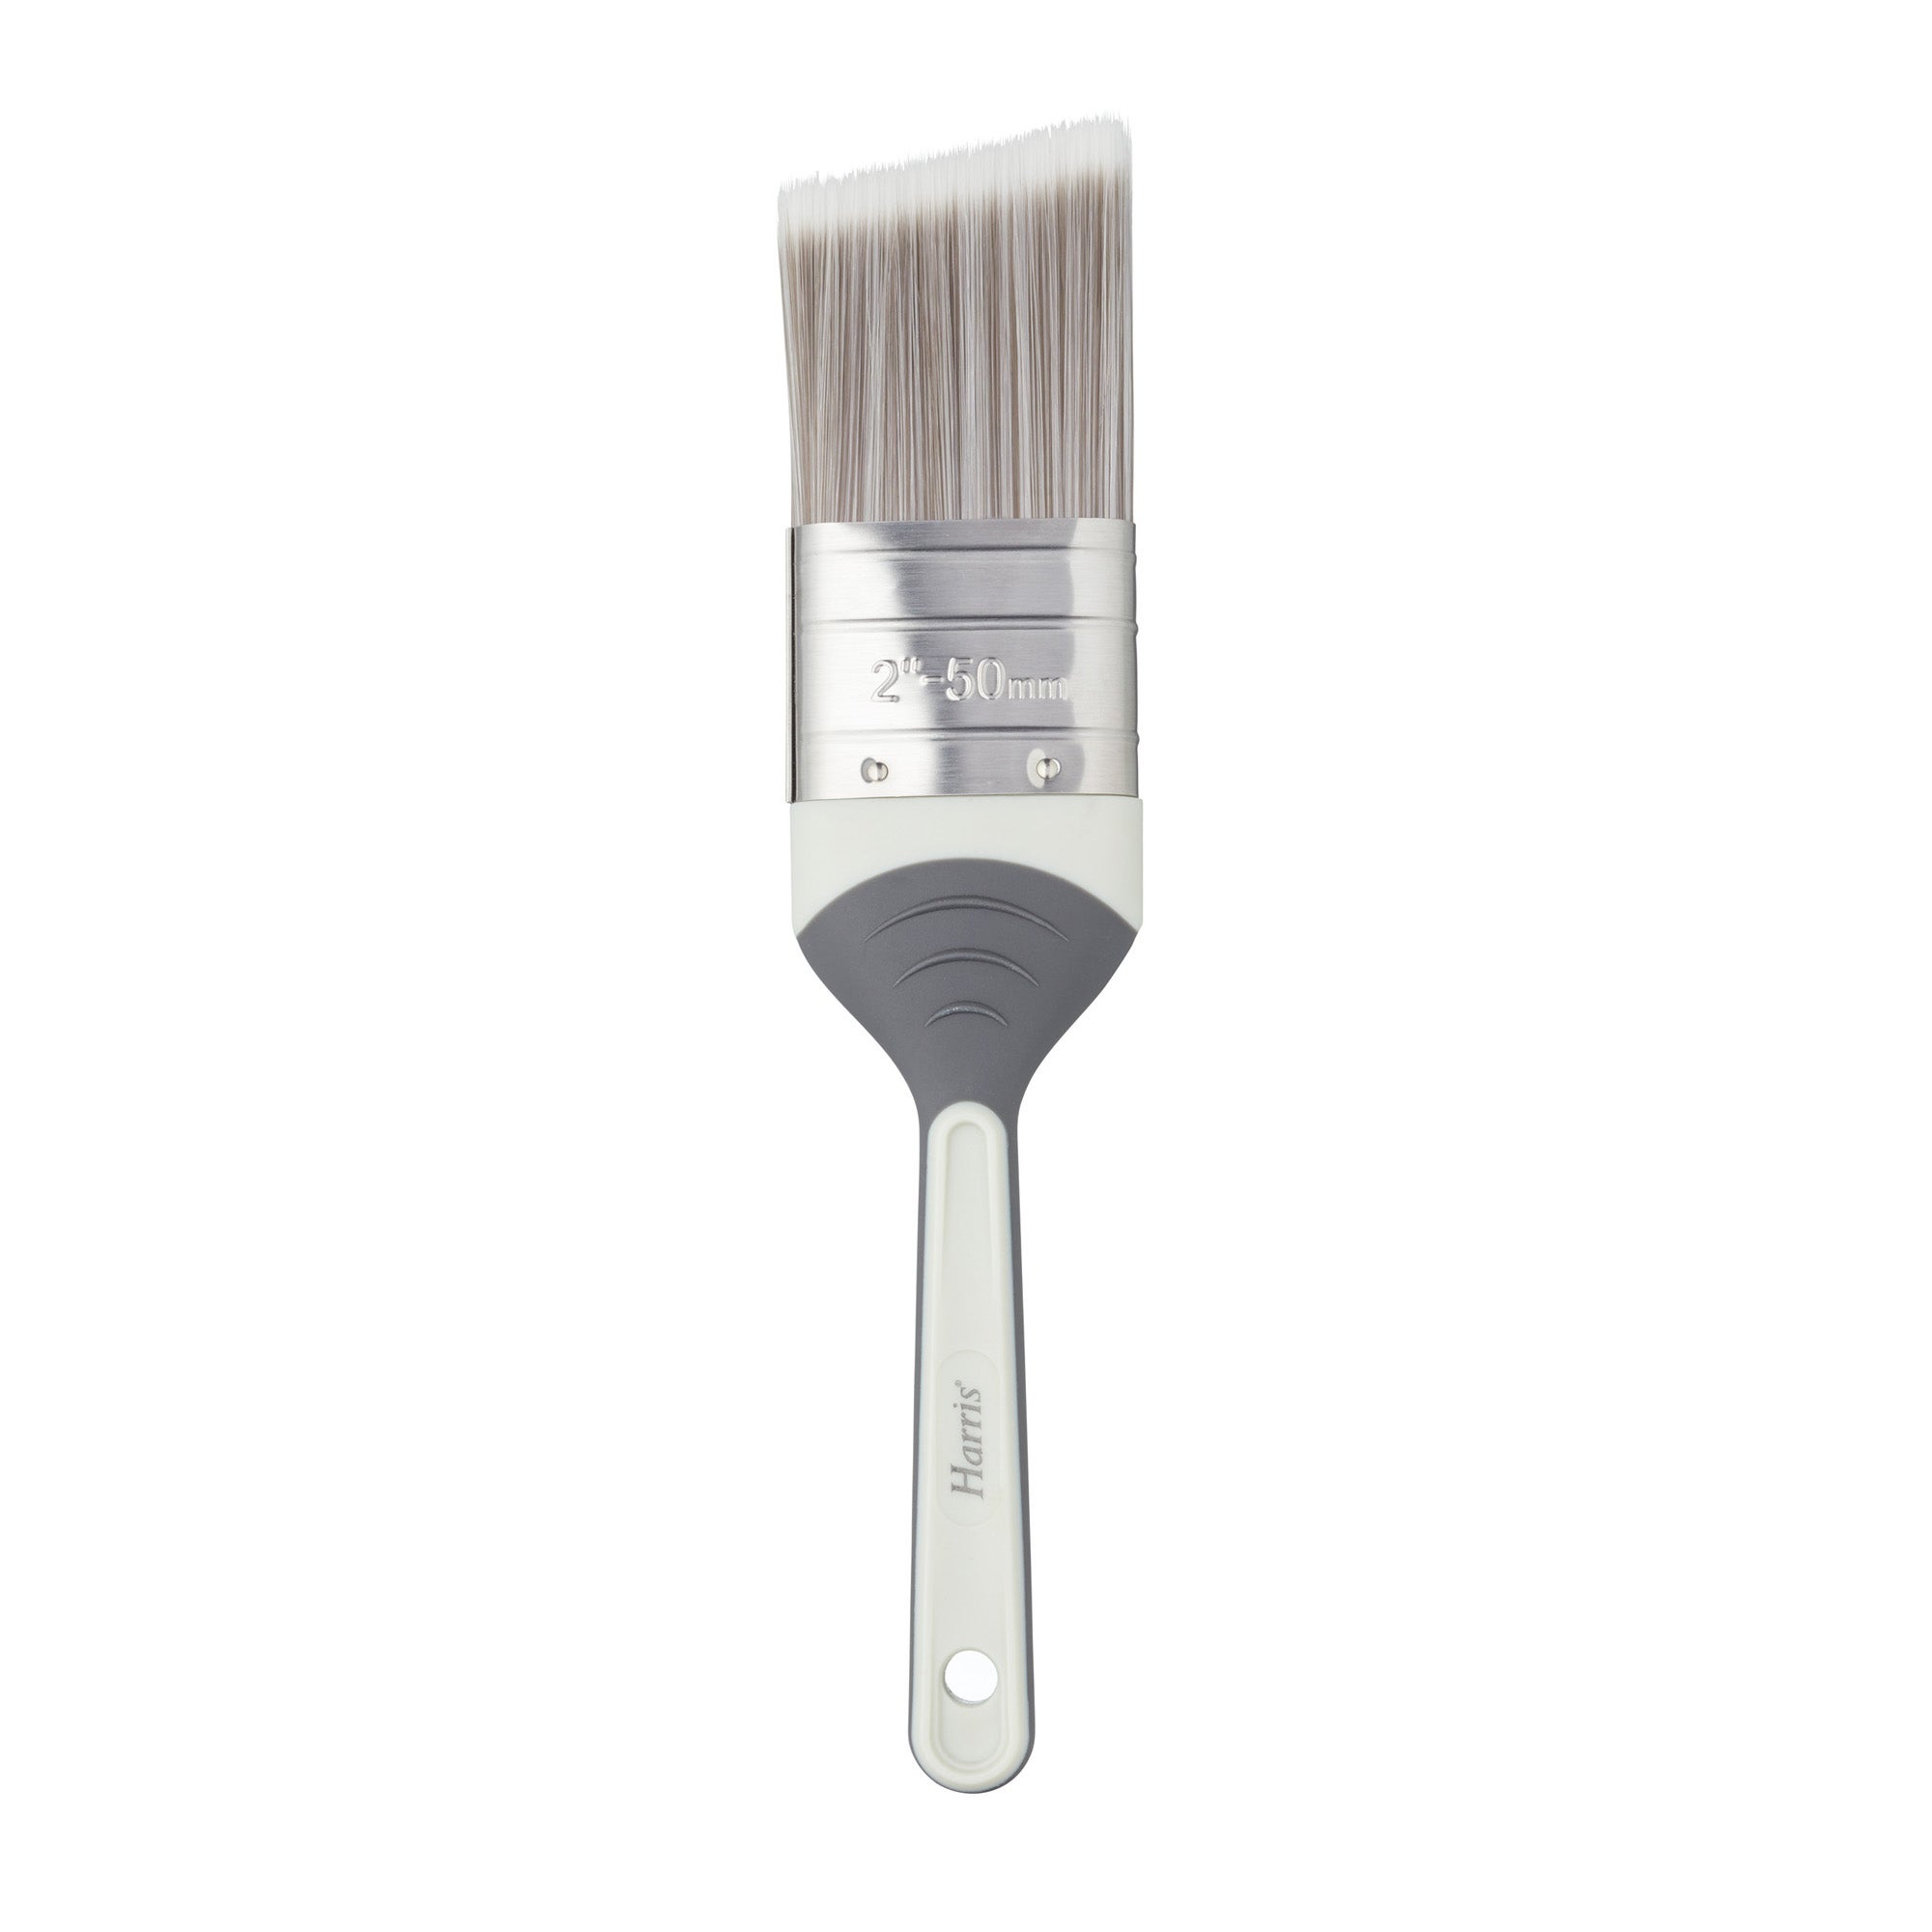 Harris Seriously Good Walls & Ceiling Angled Brush 2inch / 50mm